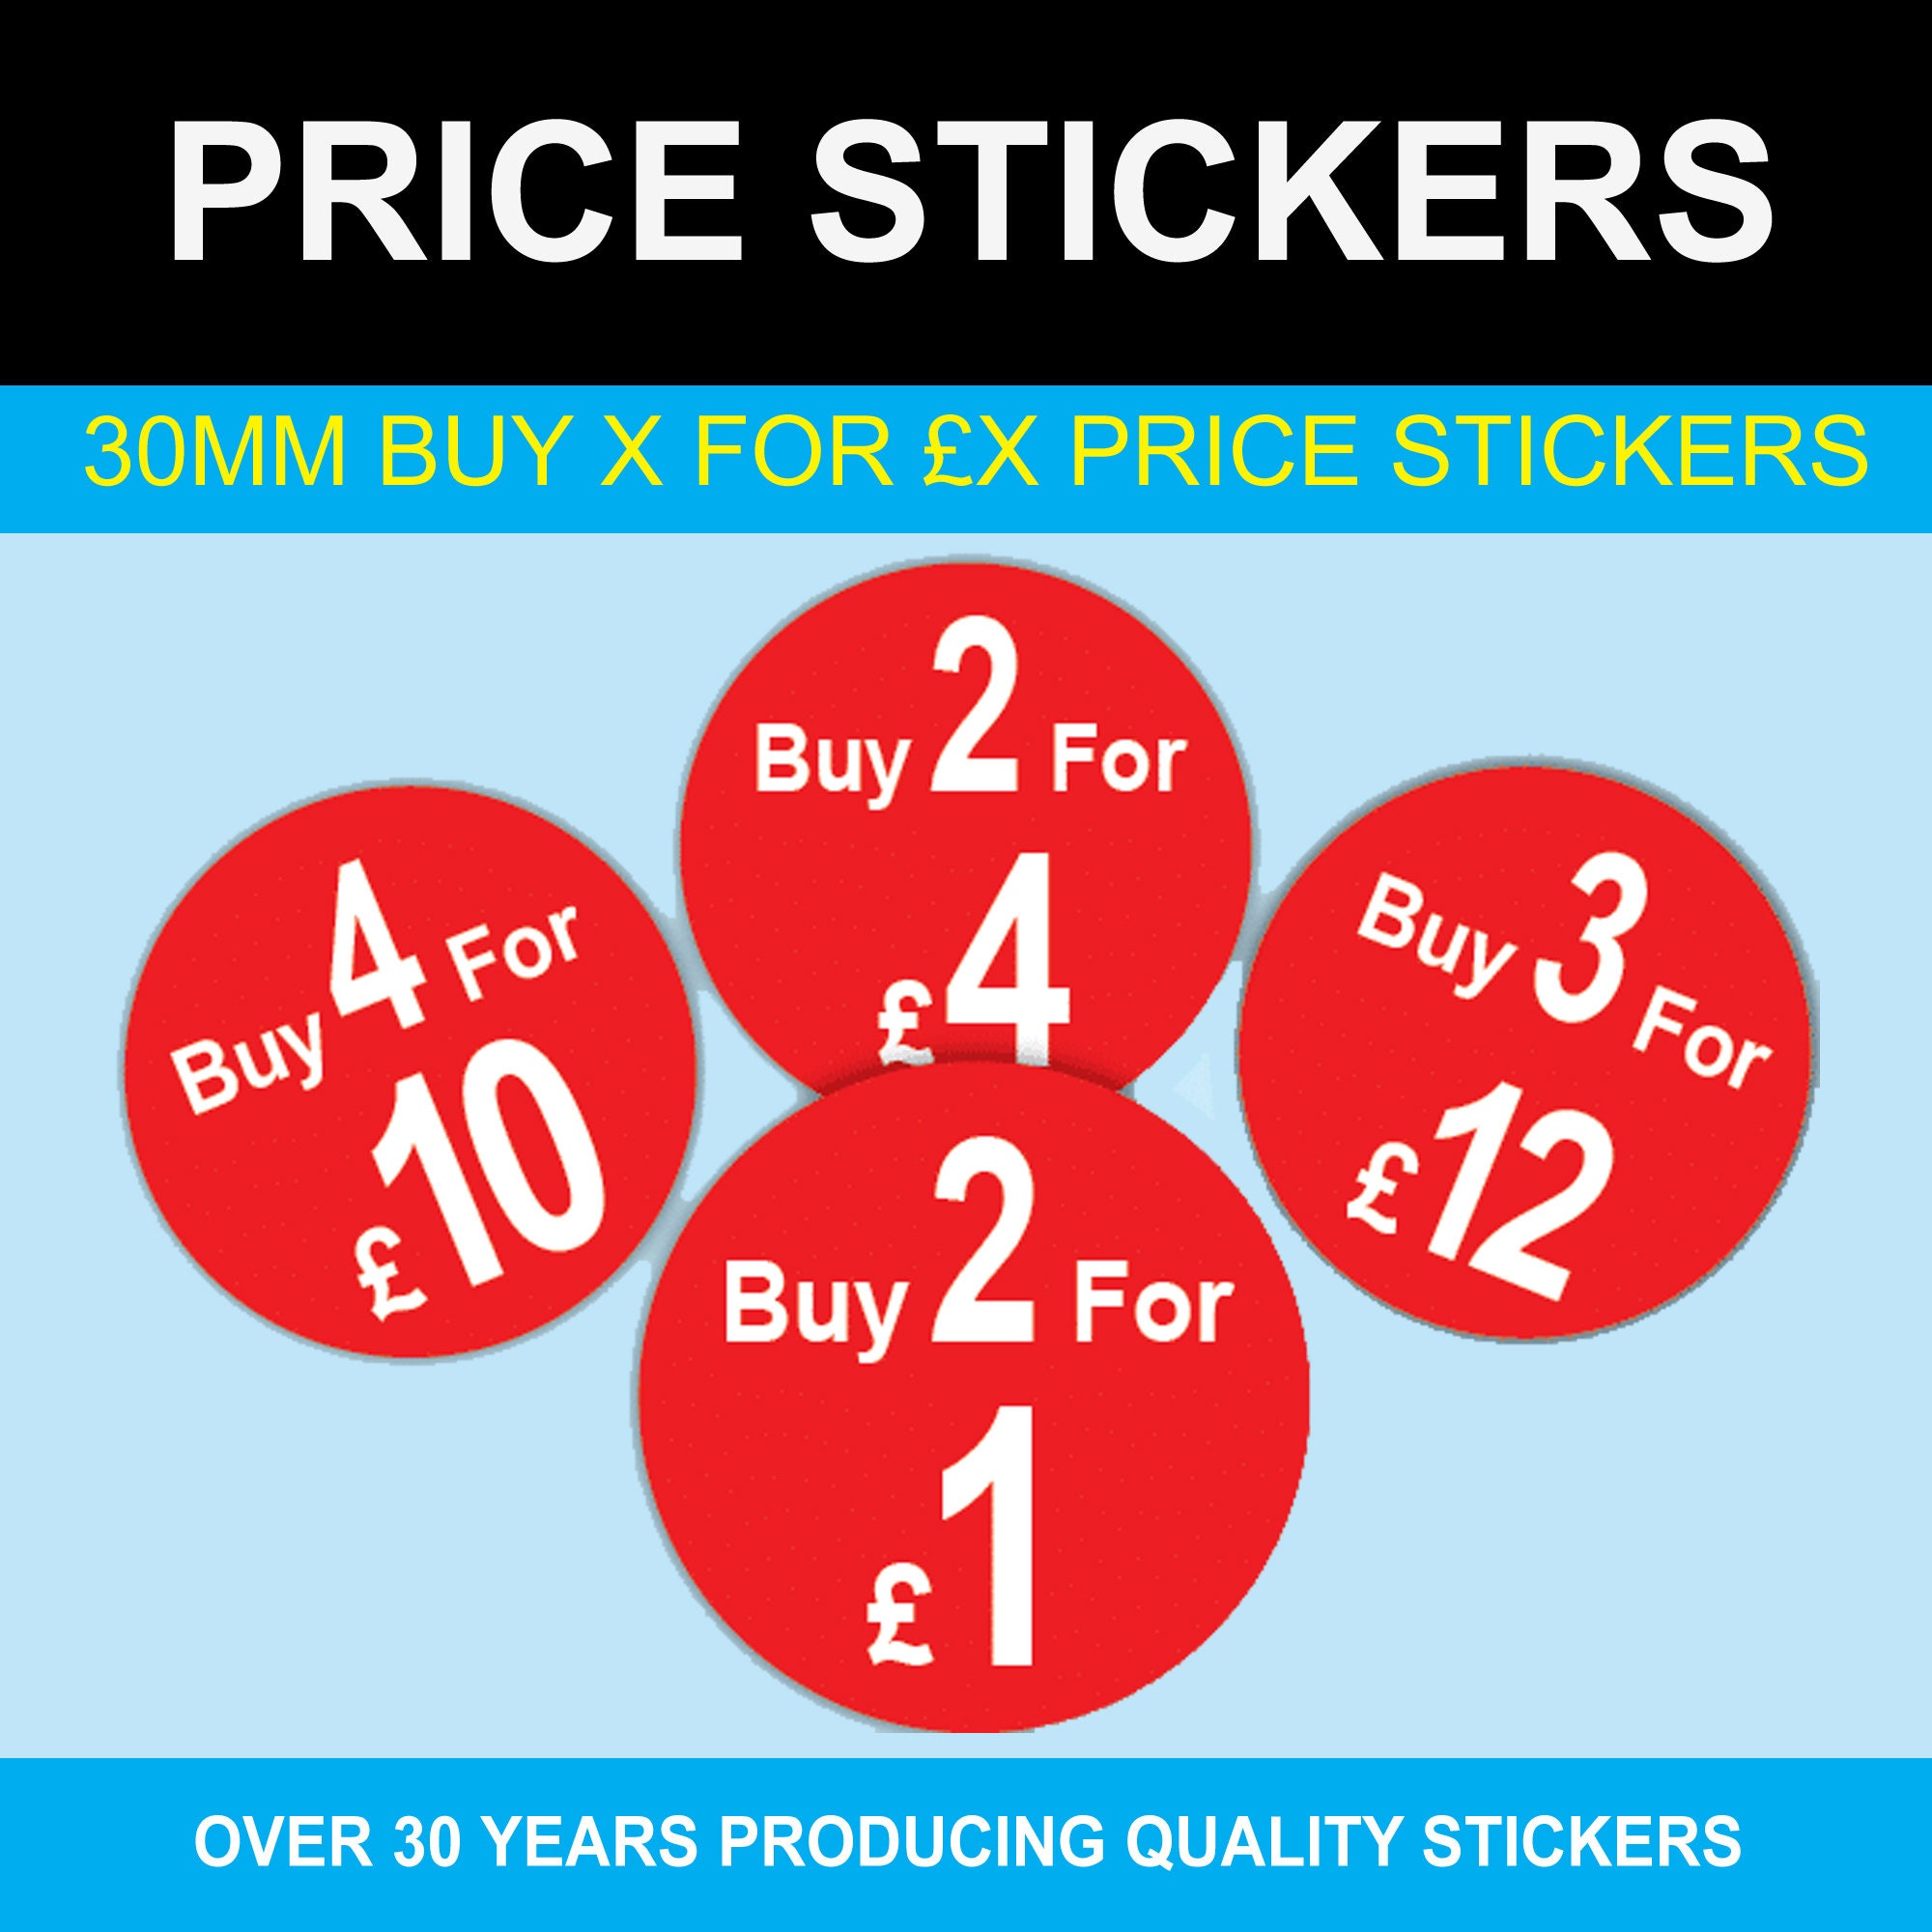 Buy X for £X Multi Buy Price Stickers Red 200 2 for £3 30mm